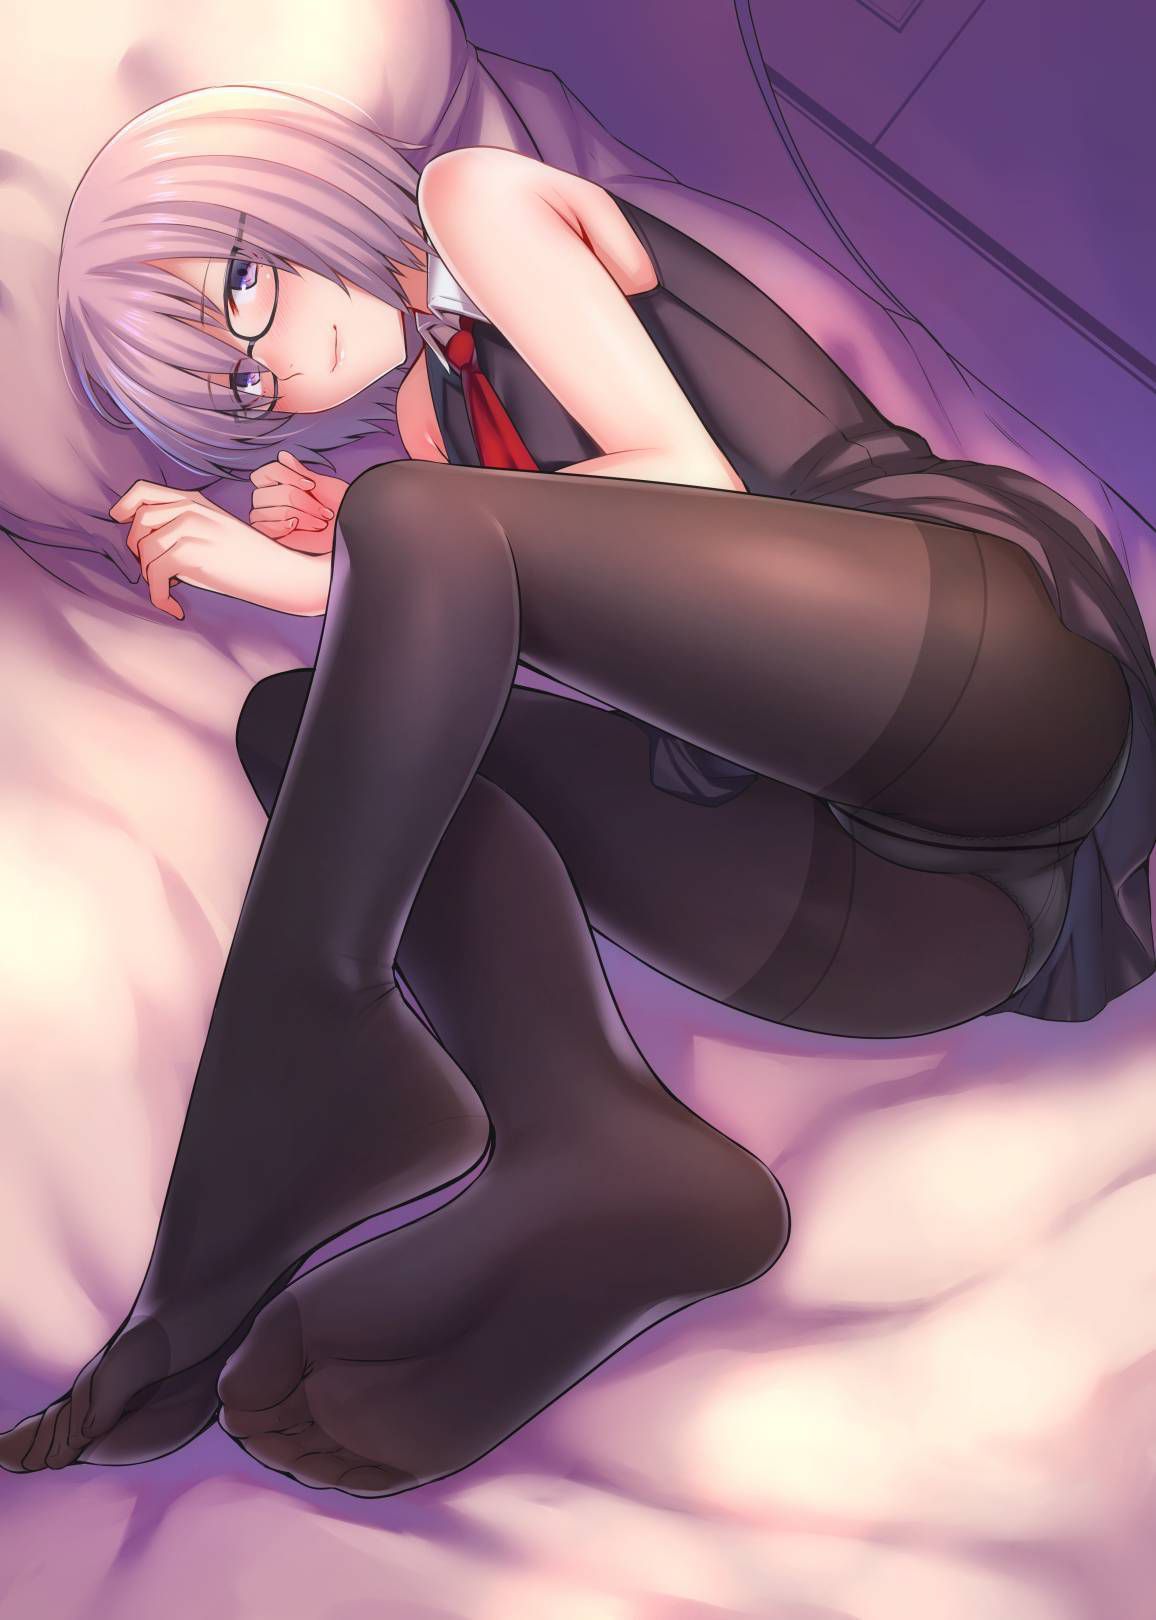 【Secondary】 Fate/Grand Order sealer, Mash Kyrielite's little erotic image summary! No.18 [20 sheets] 6